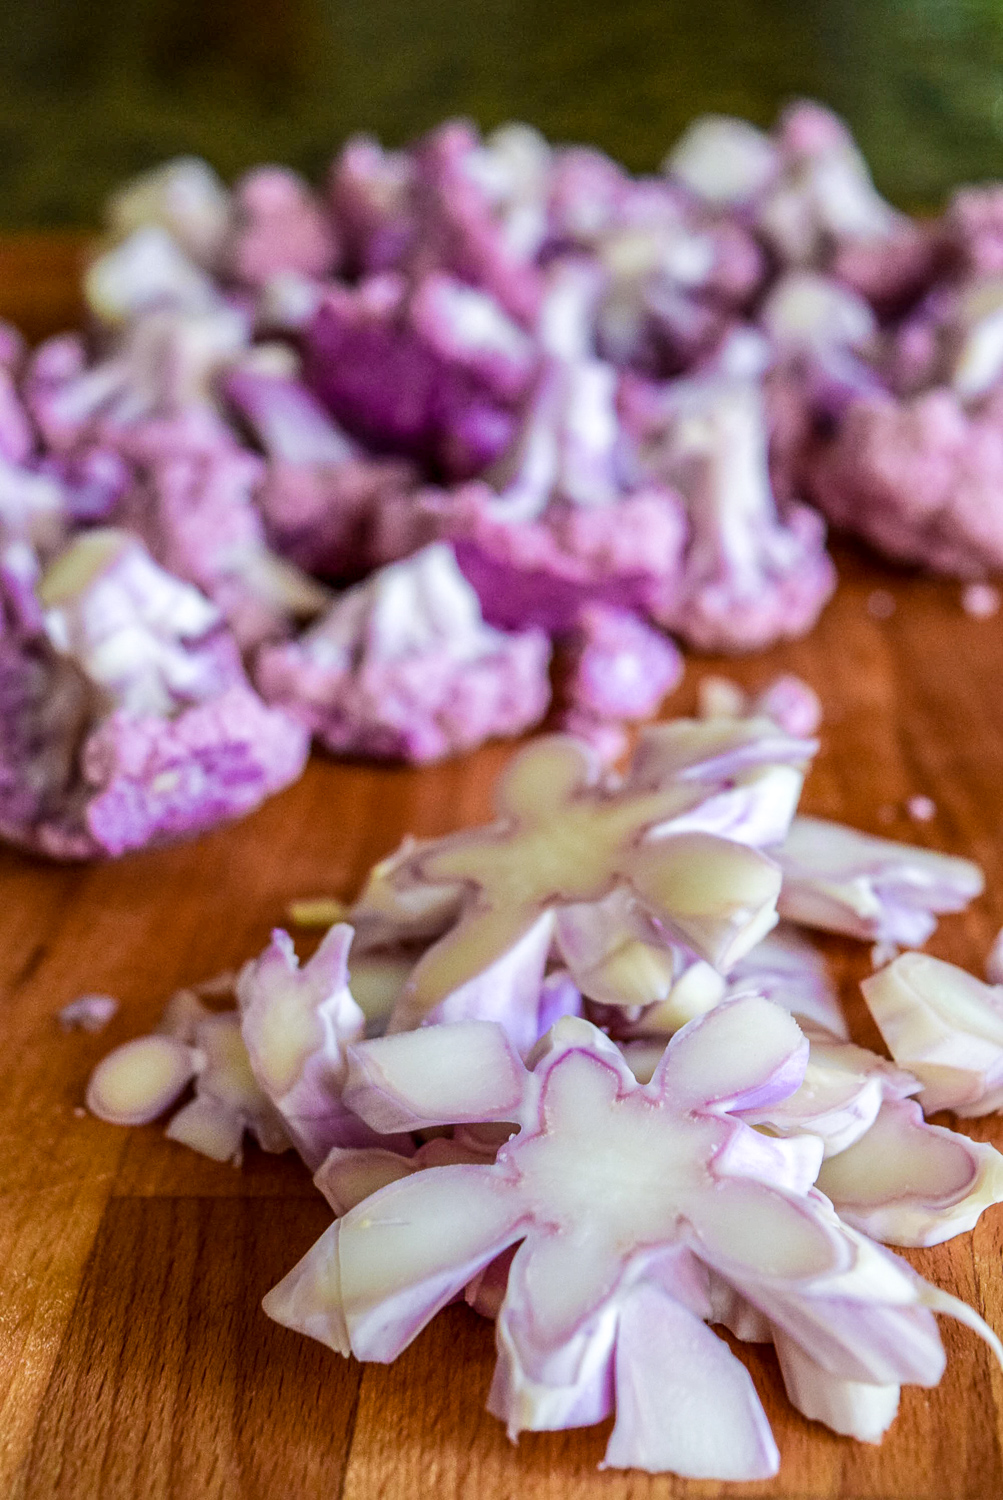 Raw purple cauliflower cut up stem pieces on cutting board with florets in background